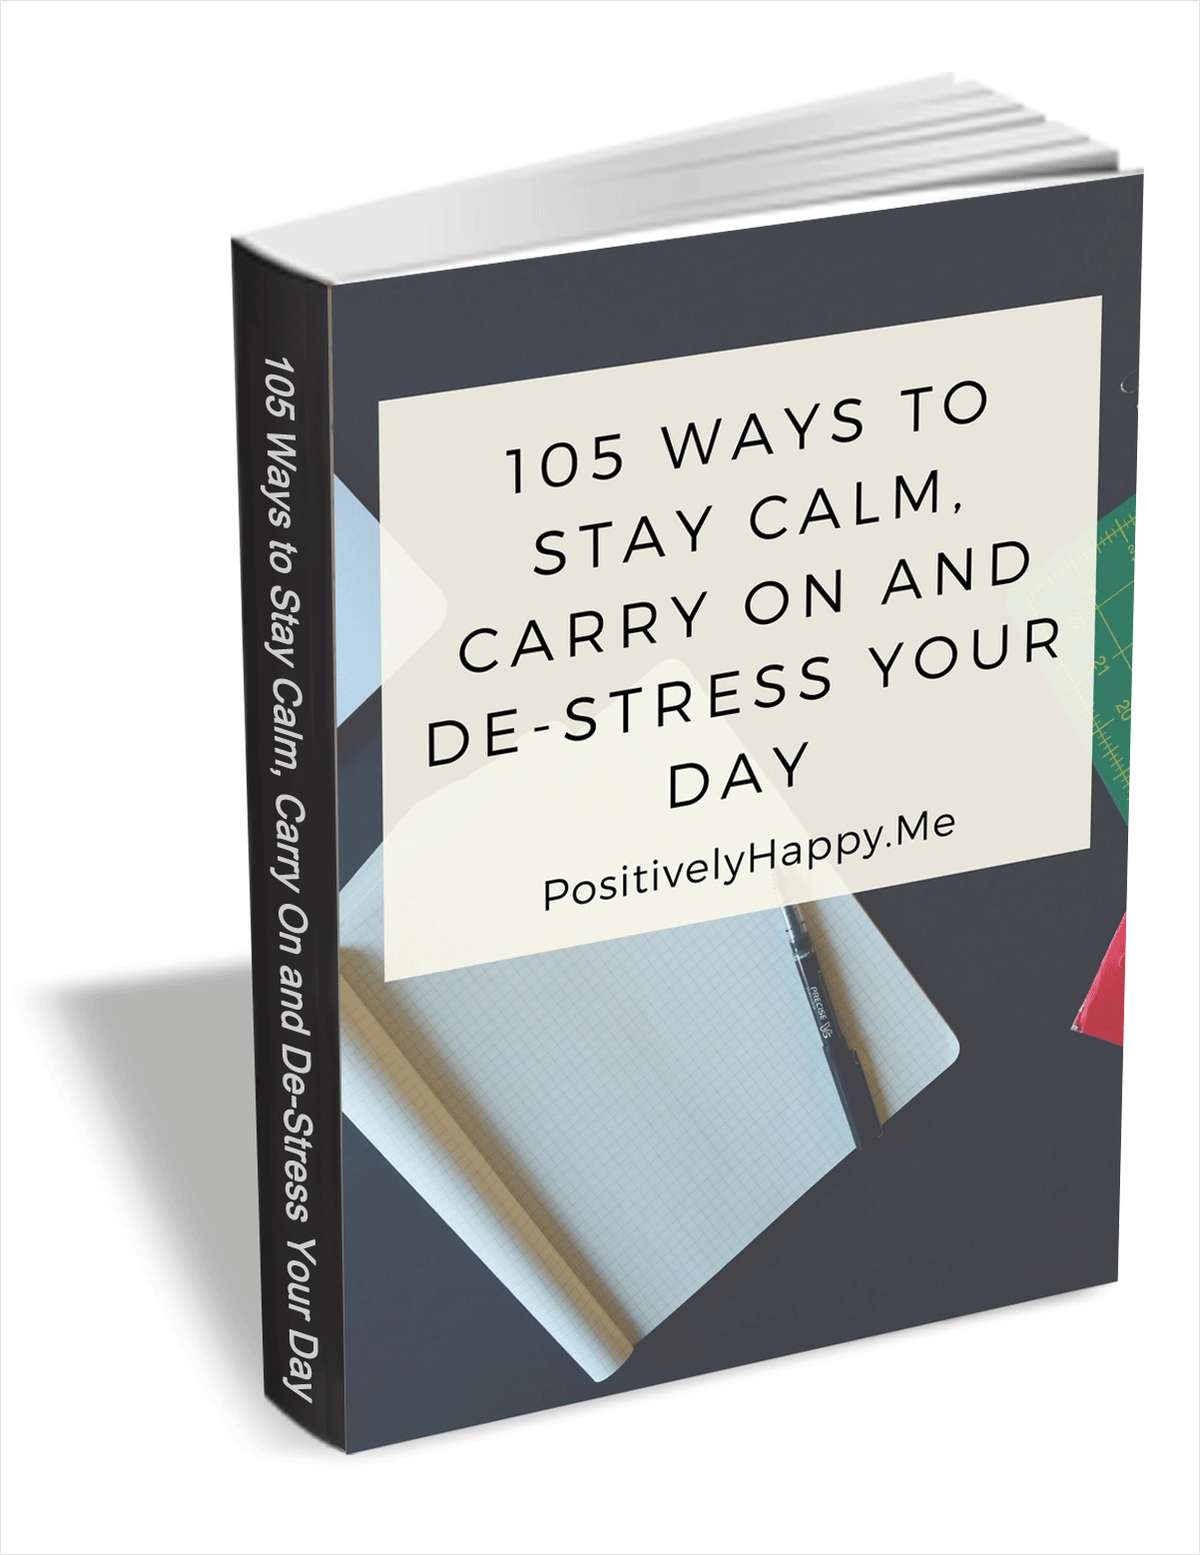 105 Ways To Stay Calm, Carry On and De-Stress Your Day